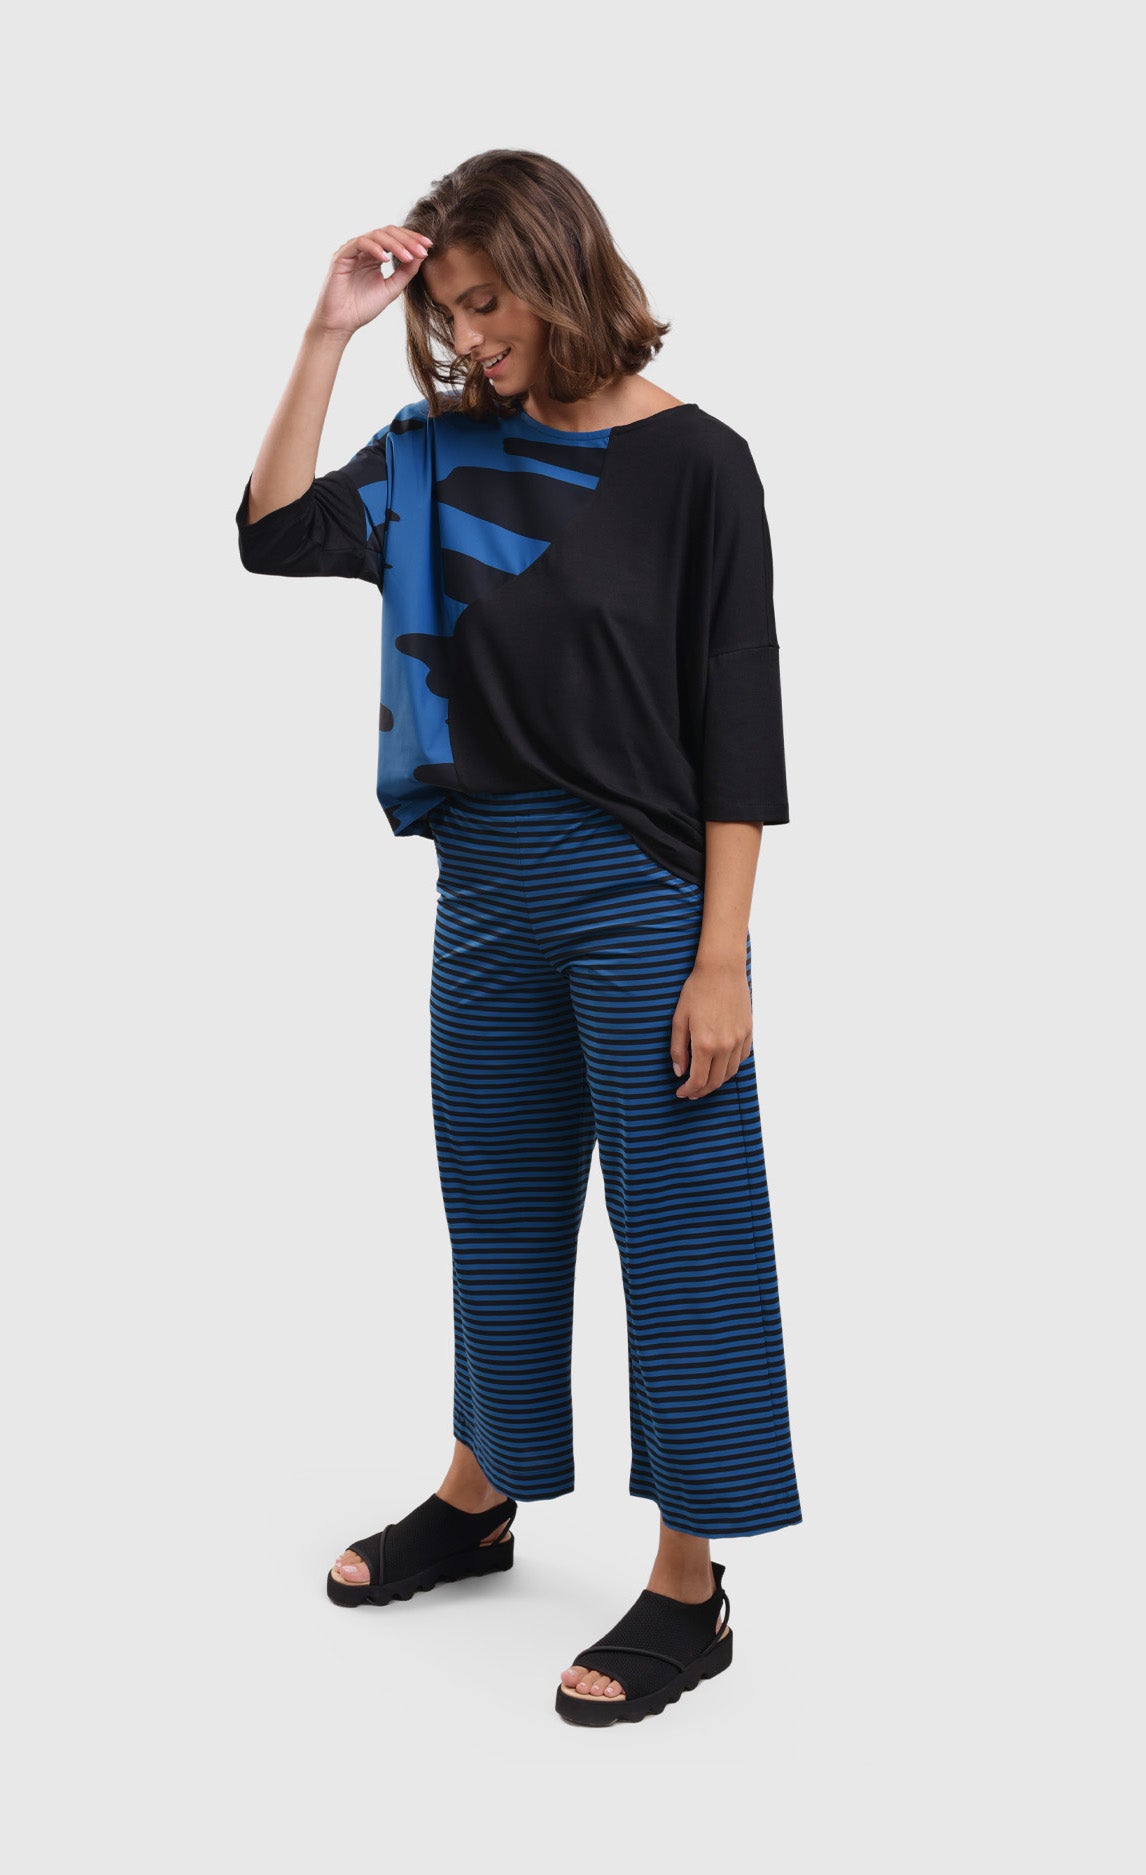 Front full body view of a woman wearing blue and black striped pants and the alembika tekbika ocean wave top. This top is black with a right sides wave paneling design in blue. The top as a scoop neck and drop shoulder, 3/4 length sleeves.